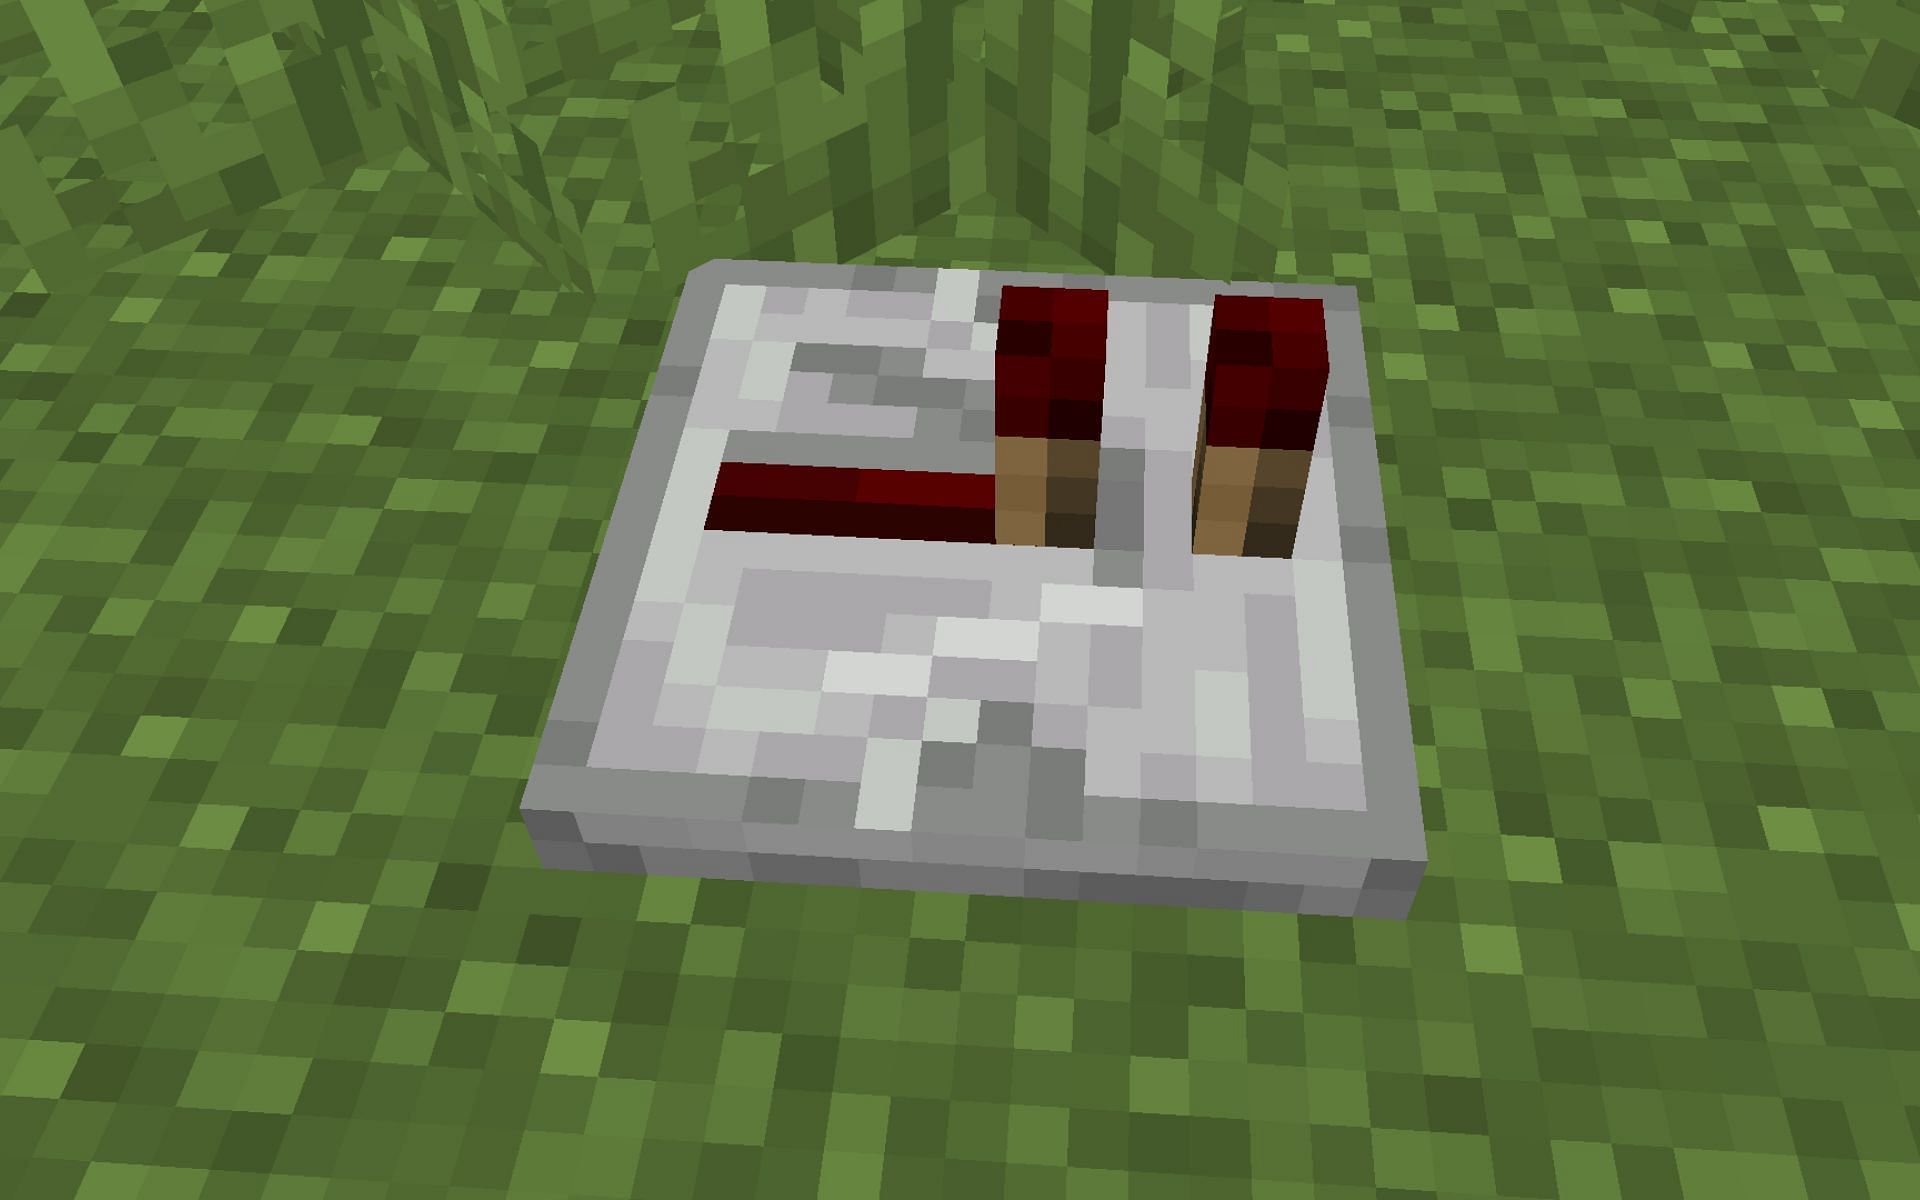 A redstone repeater is a highly useful item to create almost any contraption (Image via Minecraft 1.19 update)